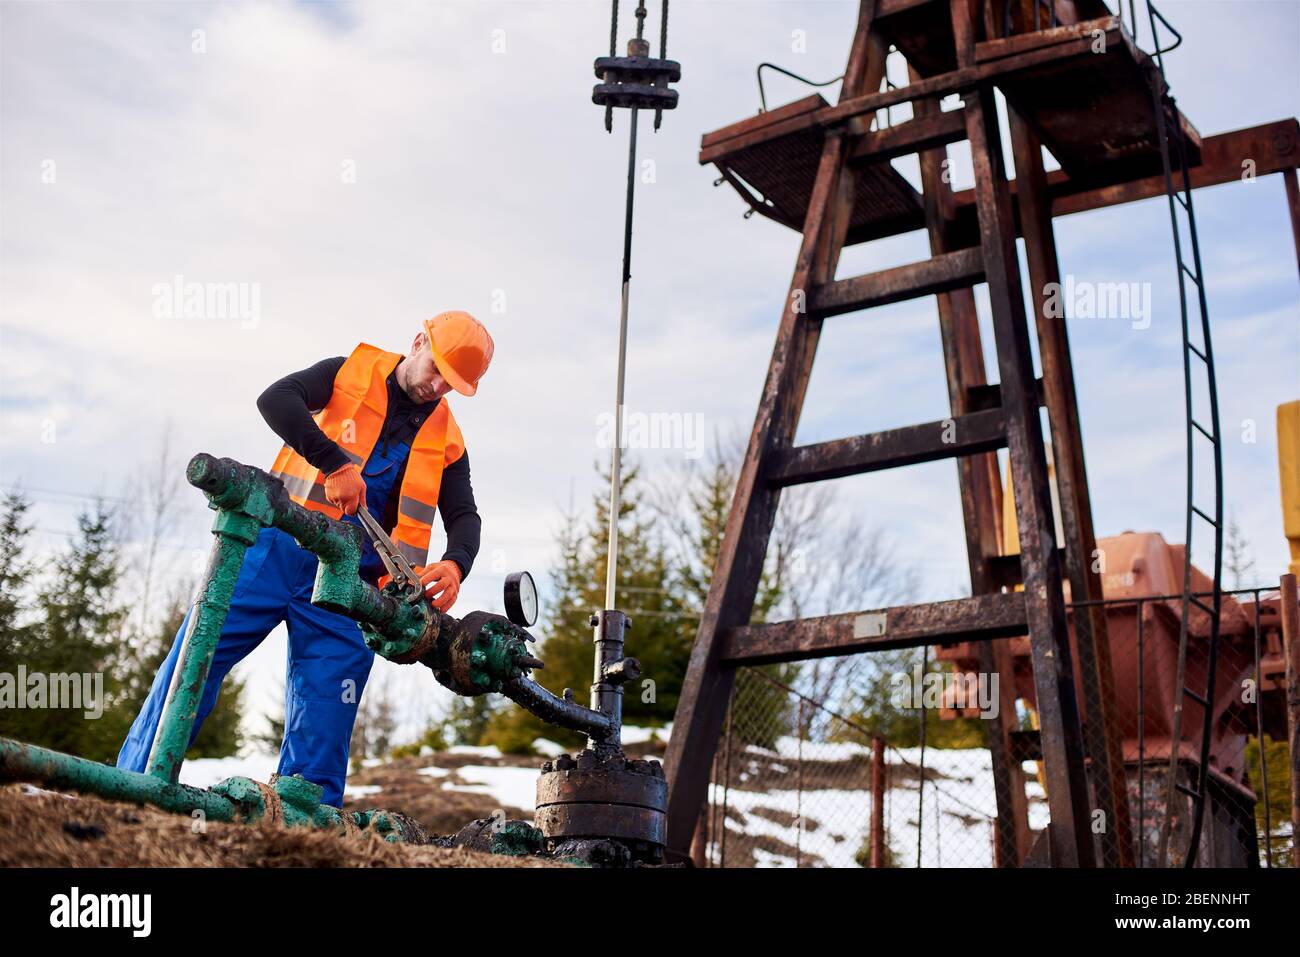 Oil worker in blue overalls, orange vest and helmet working with wrenching a bolt on a gas pipe near an oil pump jack, concept of oil industry Stock Photo